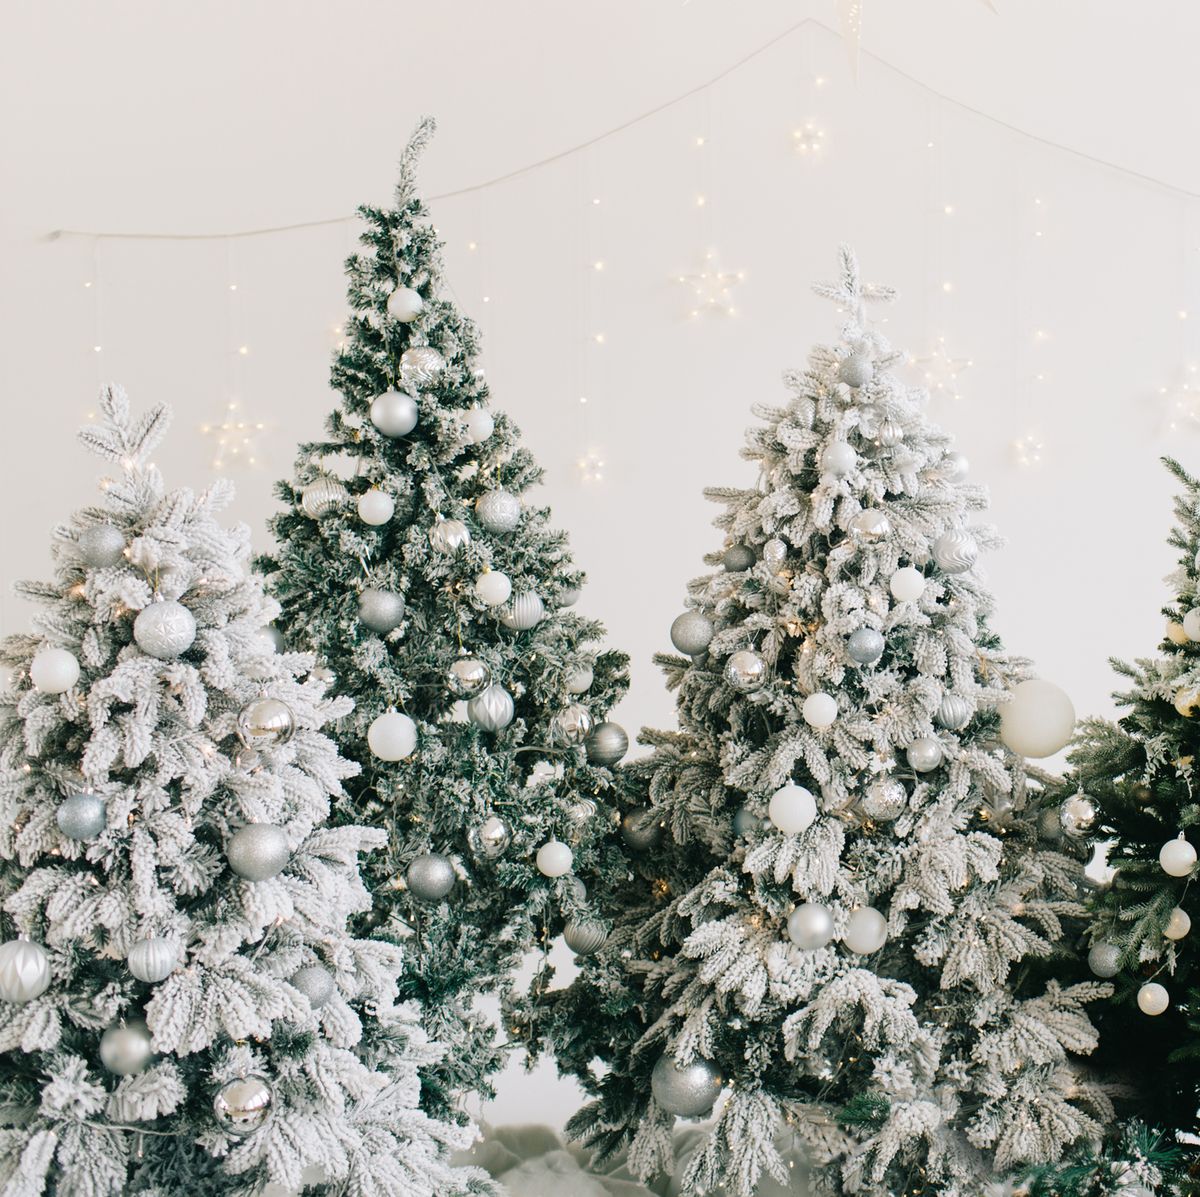 How to Flock a Christmas Tree - Best DIY Christmas Tree Flocking Tips